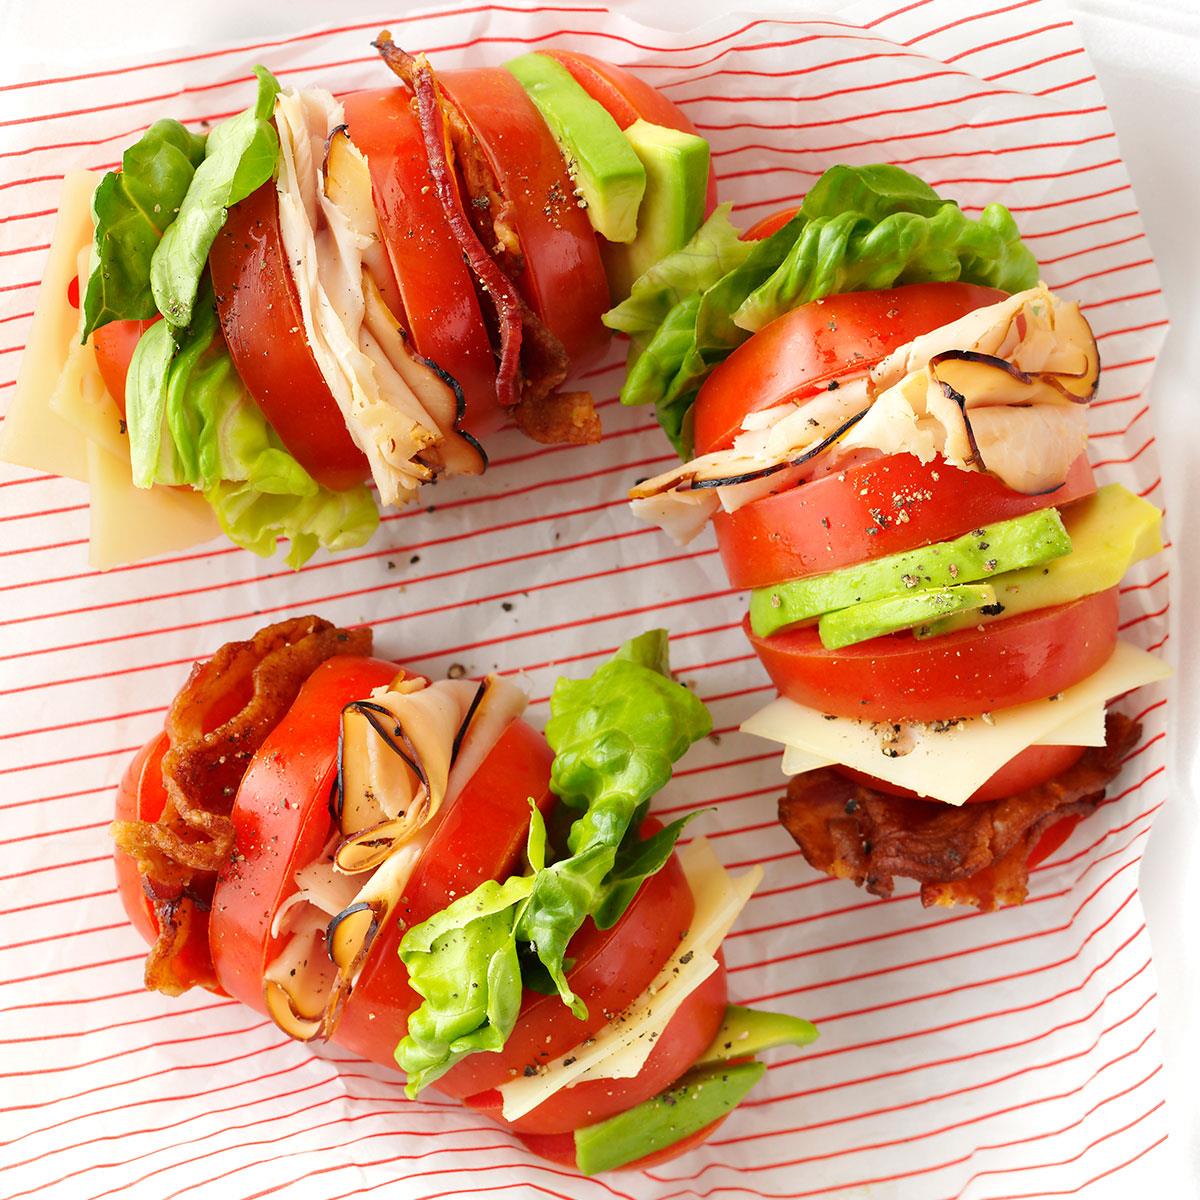 This no-fuss, no-bread riff on a classic is perfect during tomato season. Make it for lunch or pair with pasta salad for a light dinner. —Taste of Home Test Kitchen, Milwaukee, Wisconsin <a href="https://www.tasteofhome.com/recipes/hasselback-tomato-clubs/">Get Recipe</a>